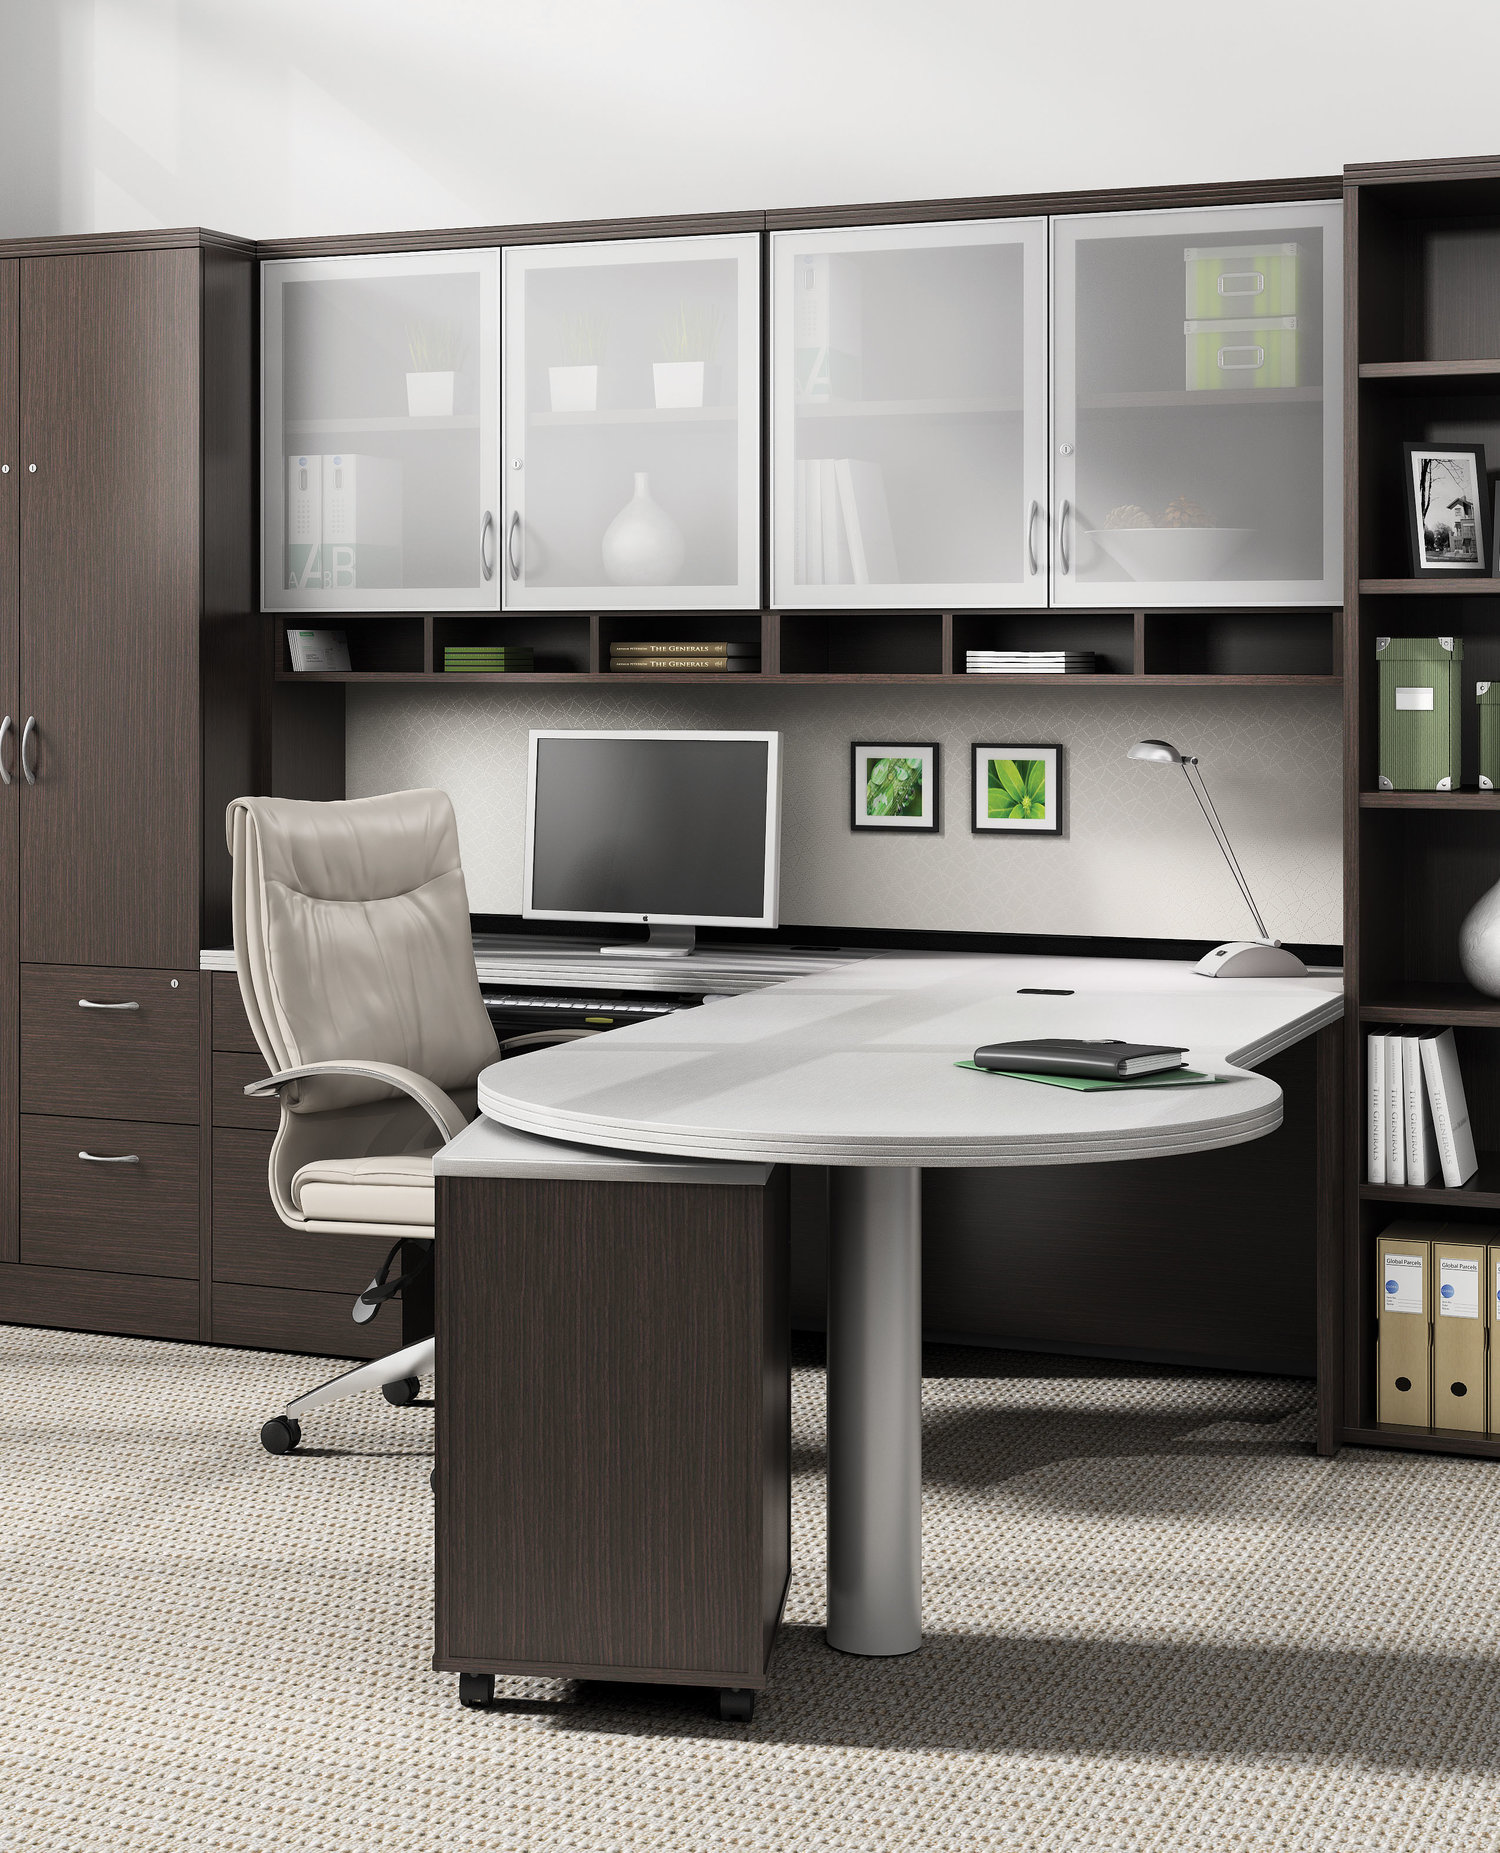 New Used Office Furniture Knoxville Tn Office Works Llc